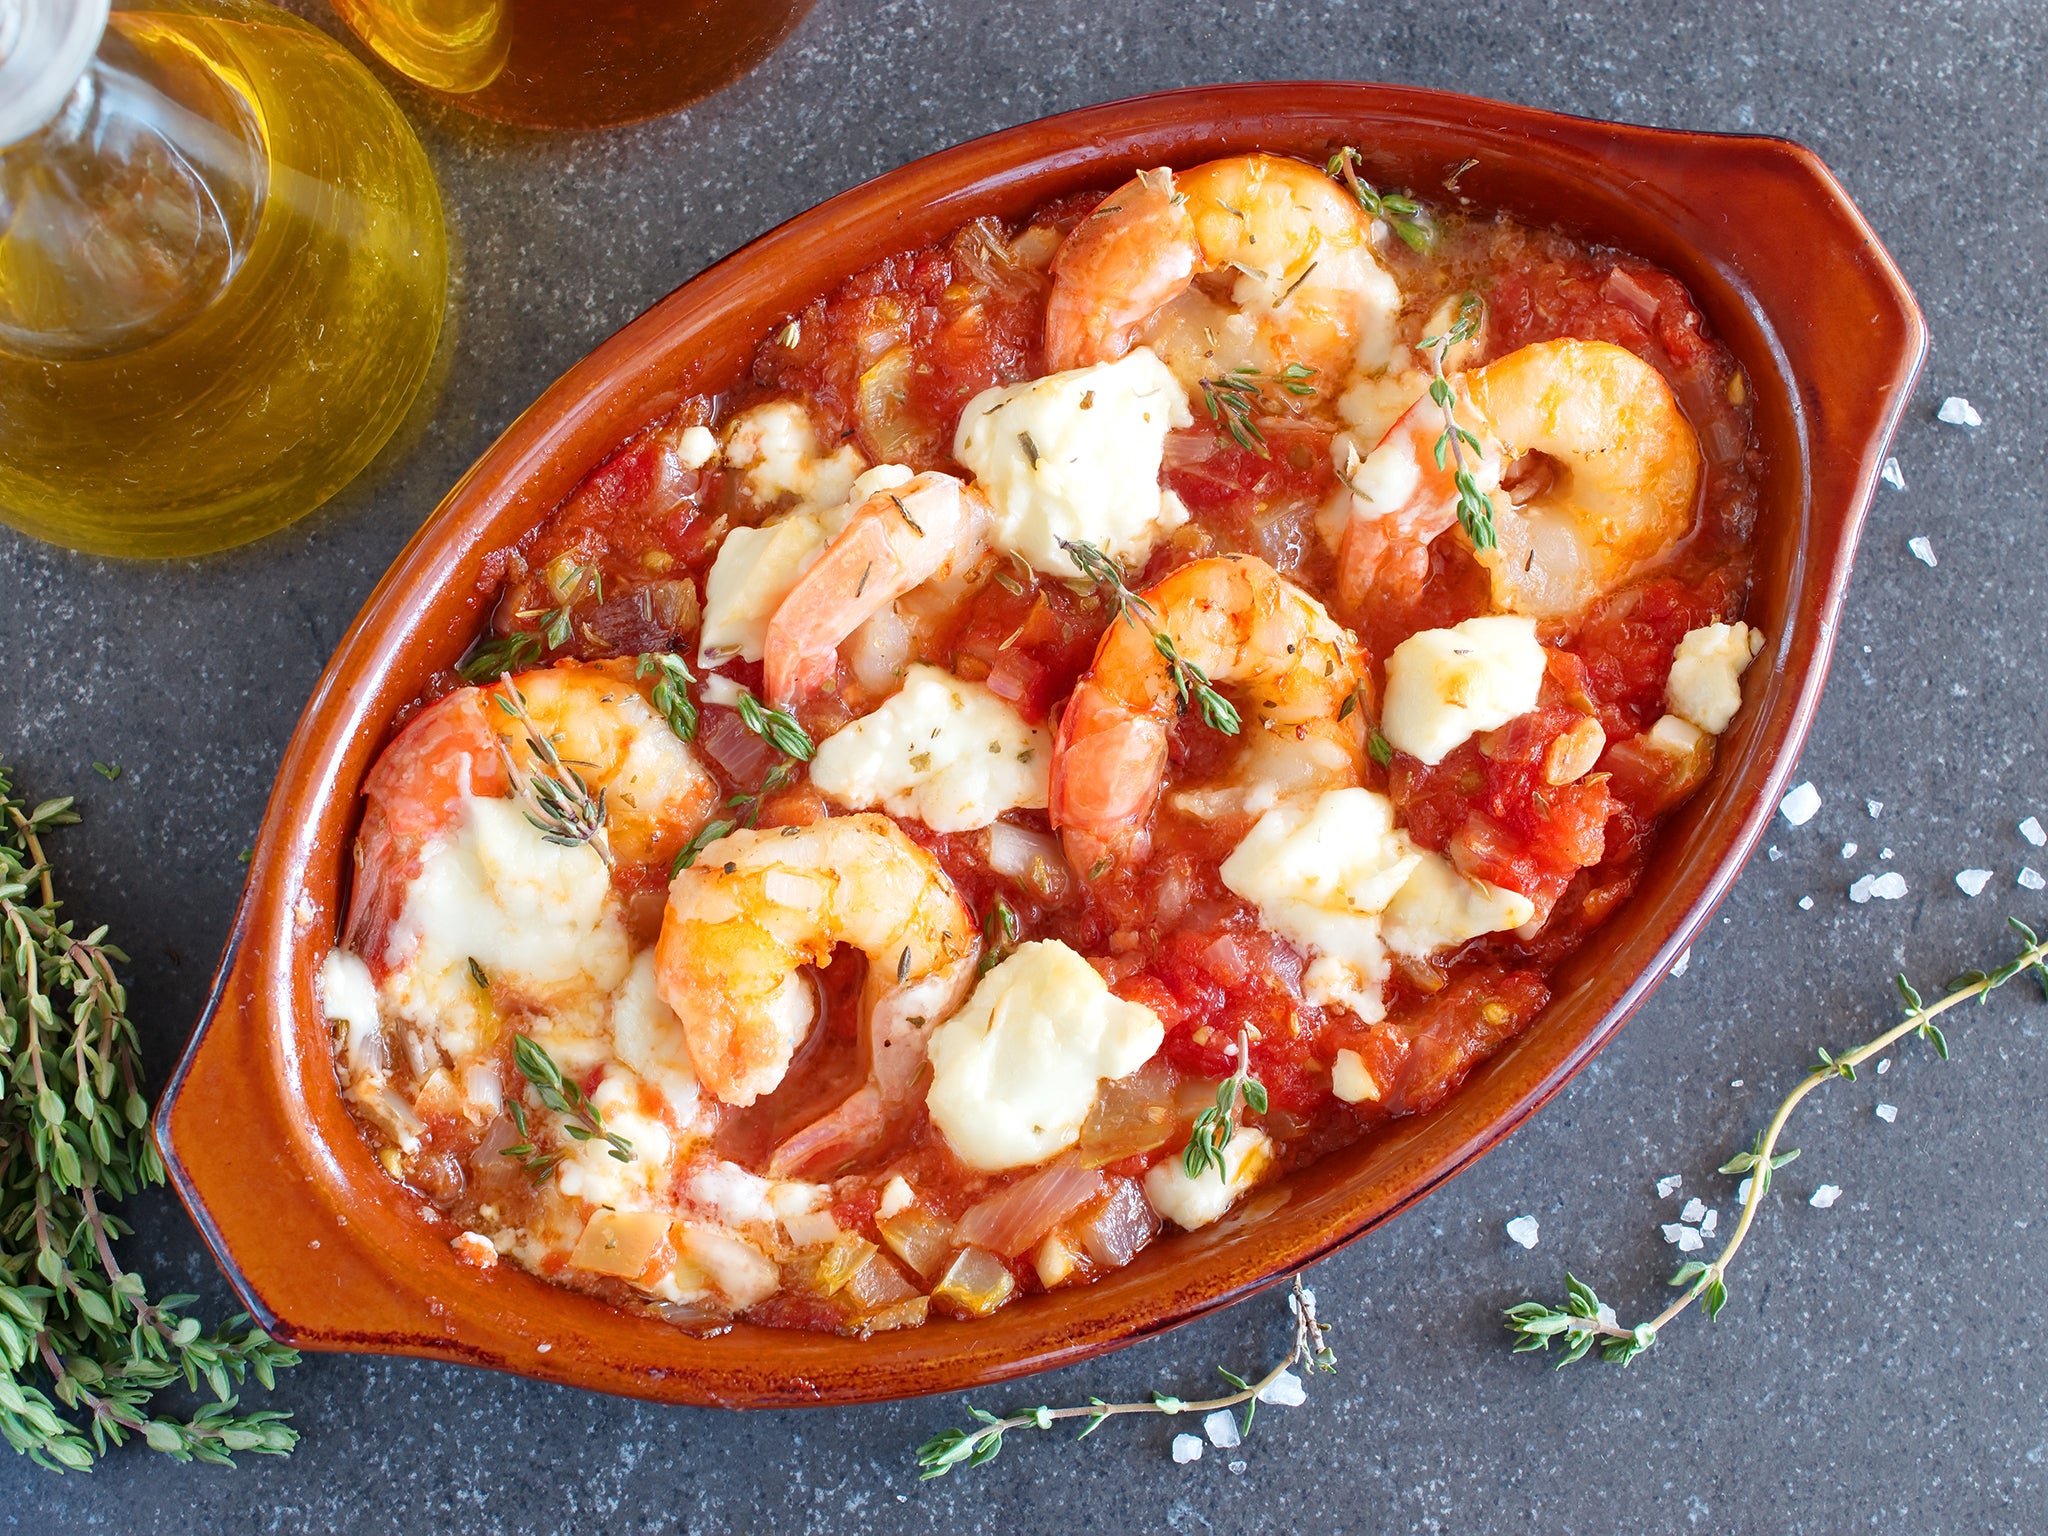 This traditional Greek recipe disregards the notion that seafood and cheese don’t mix